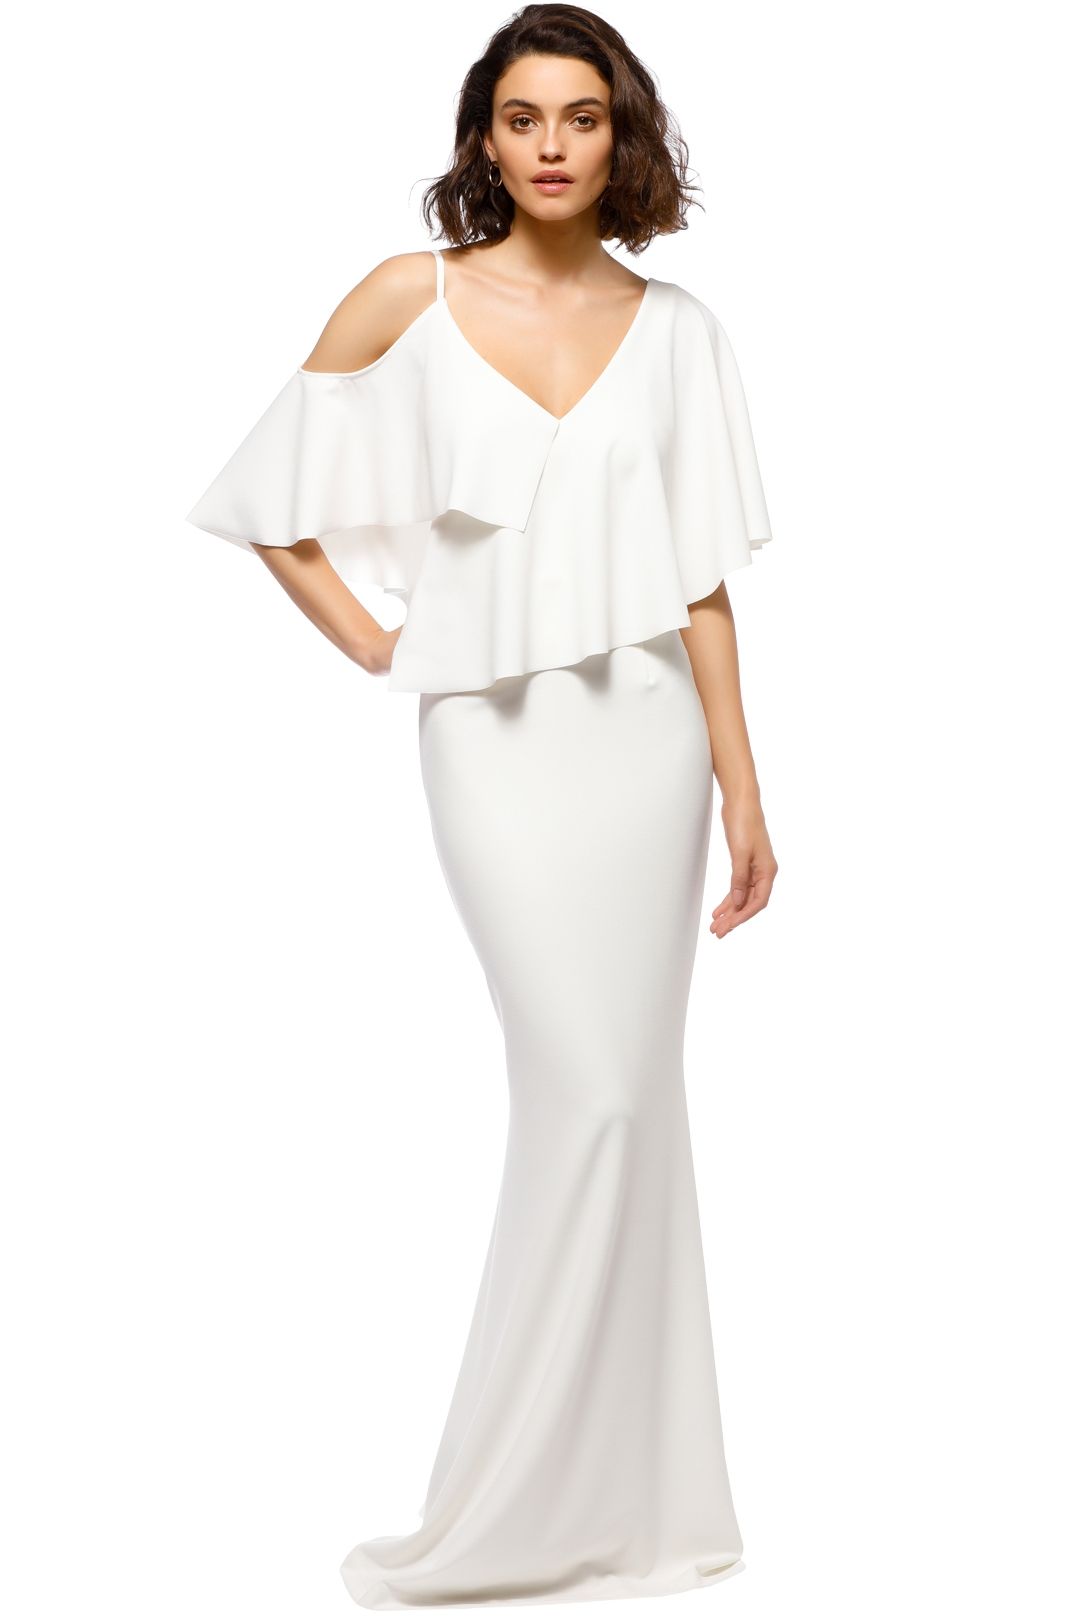 Pasduchas - Irreplaceable Gown - Ivory - Front